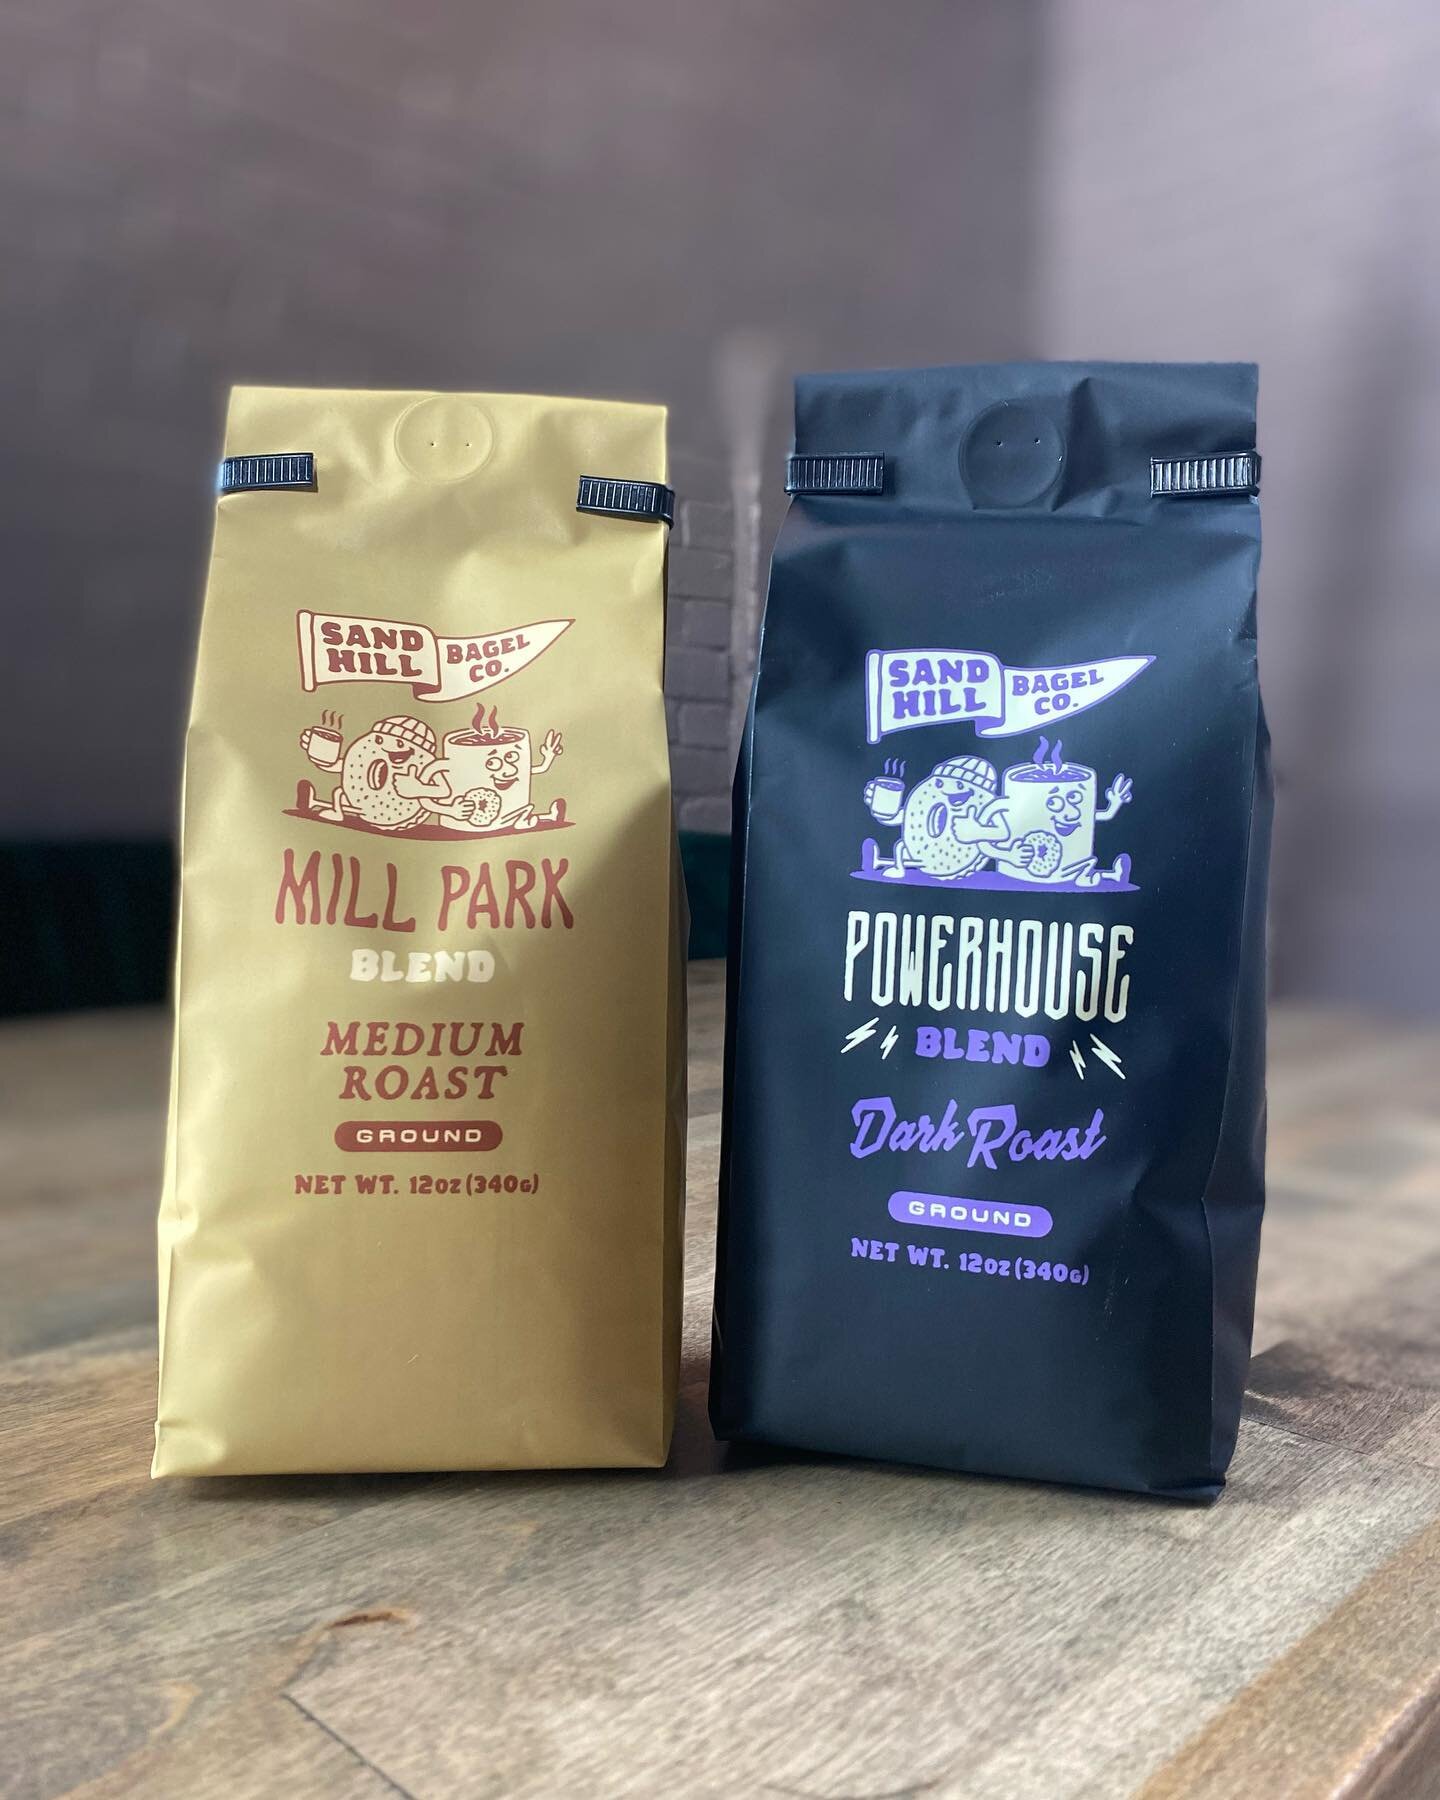 Meet your new favorite coffee, Powerhouse and Mill Park Blend!